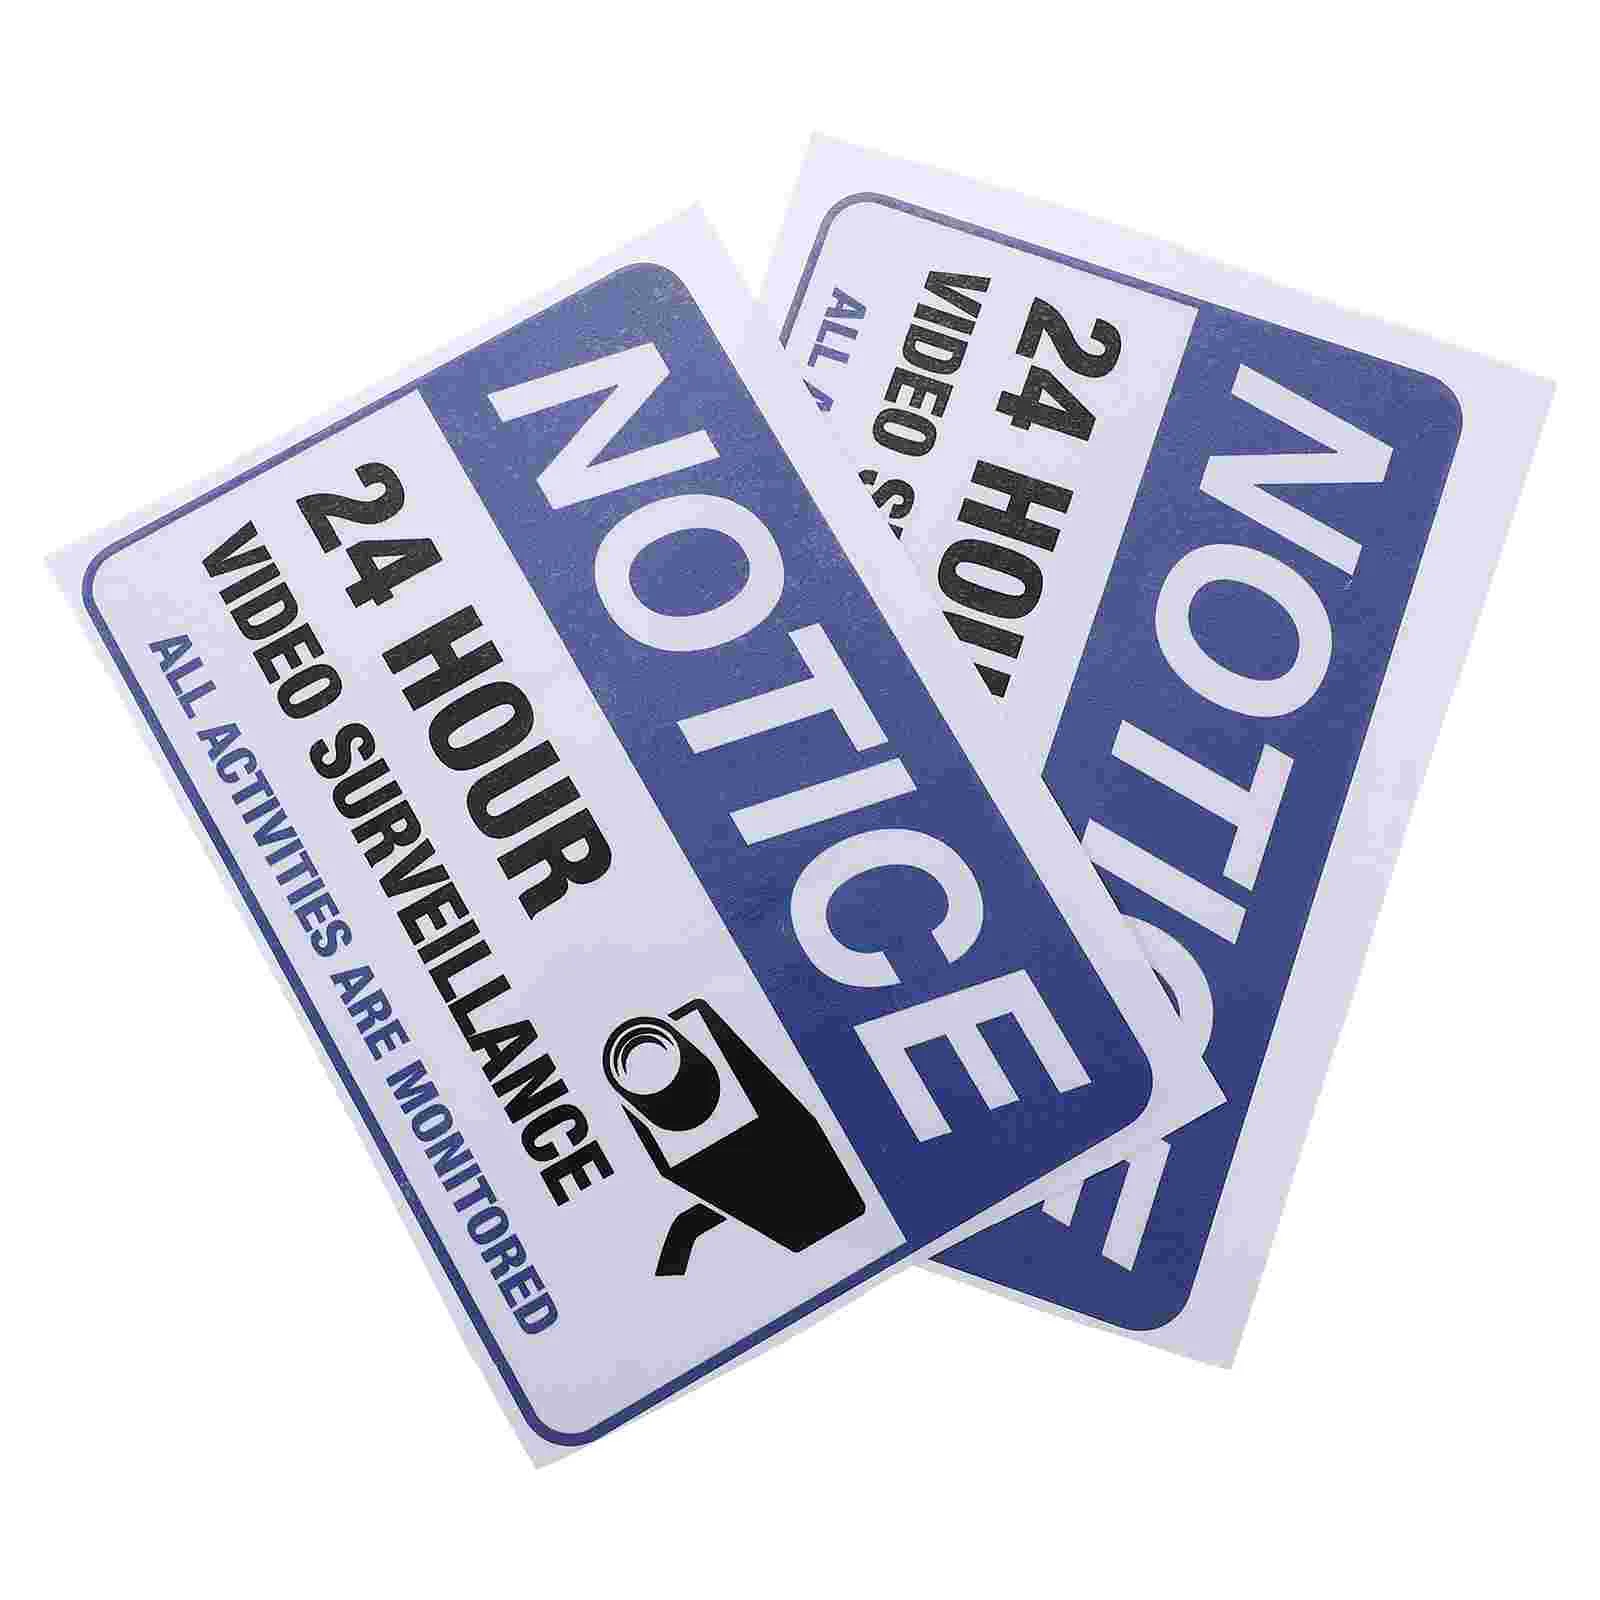 

2 Pcs Monitoring Warning Stickers Monitored Car Adhesive Caution Decal Applique